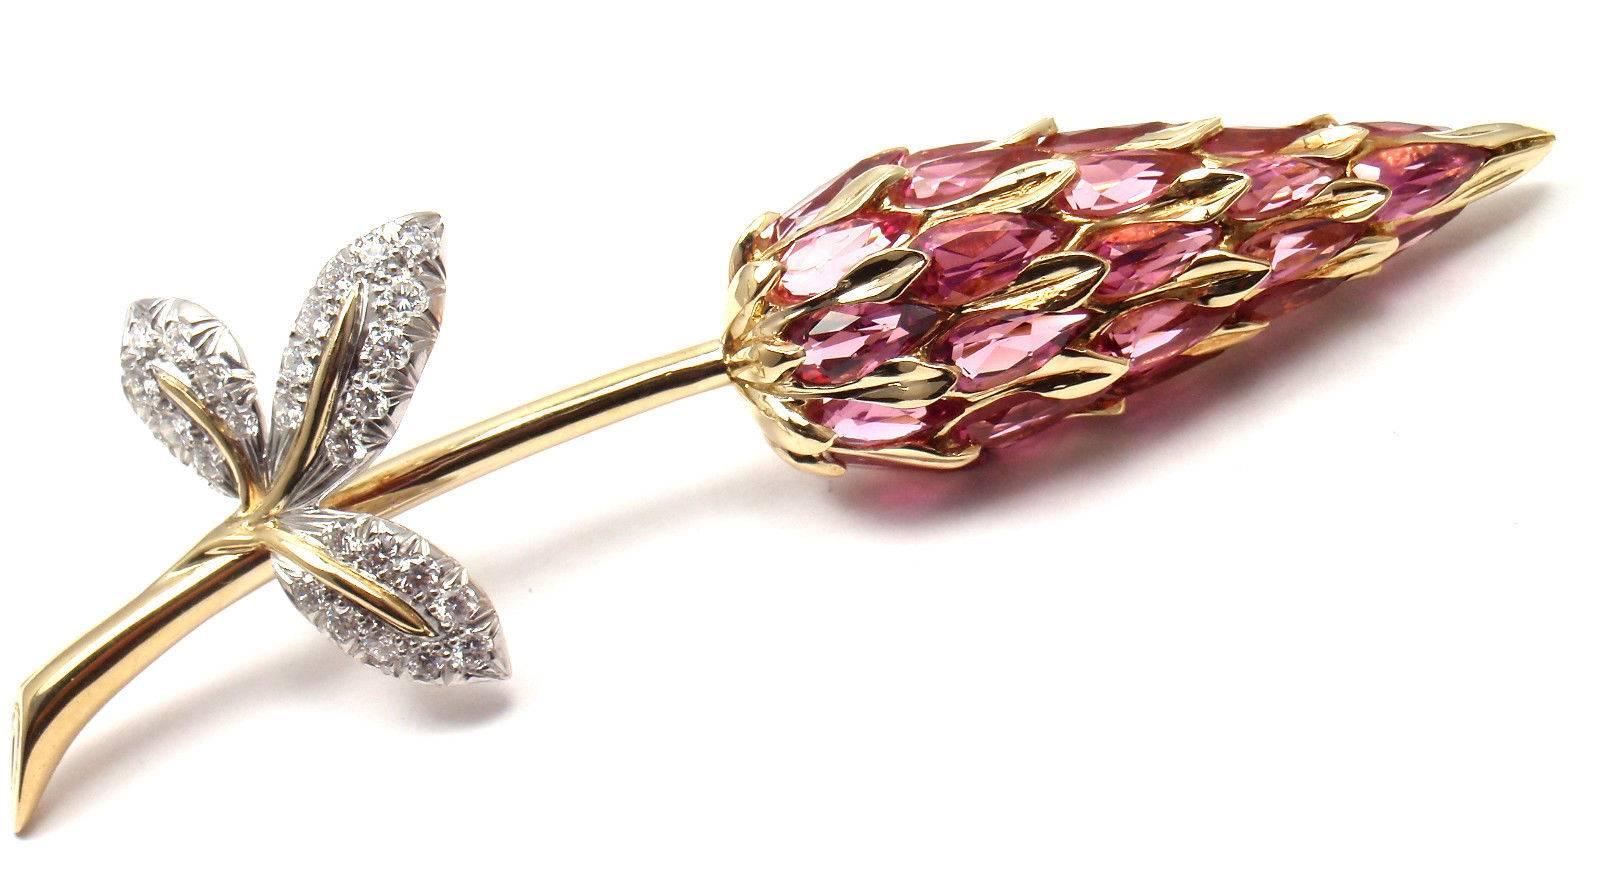 18k Yellow Gold Diamond Pink Tourmaline Pin Brooch by Jean Schlumberger for Tiffany & Co.  
With 26 round brilliant cut diamonds VVS1 clarity, E color total weight approx. .75ct
25 pink tourmaline stones

Details:  
Weight: 16.6